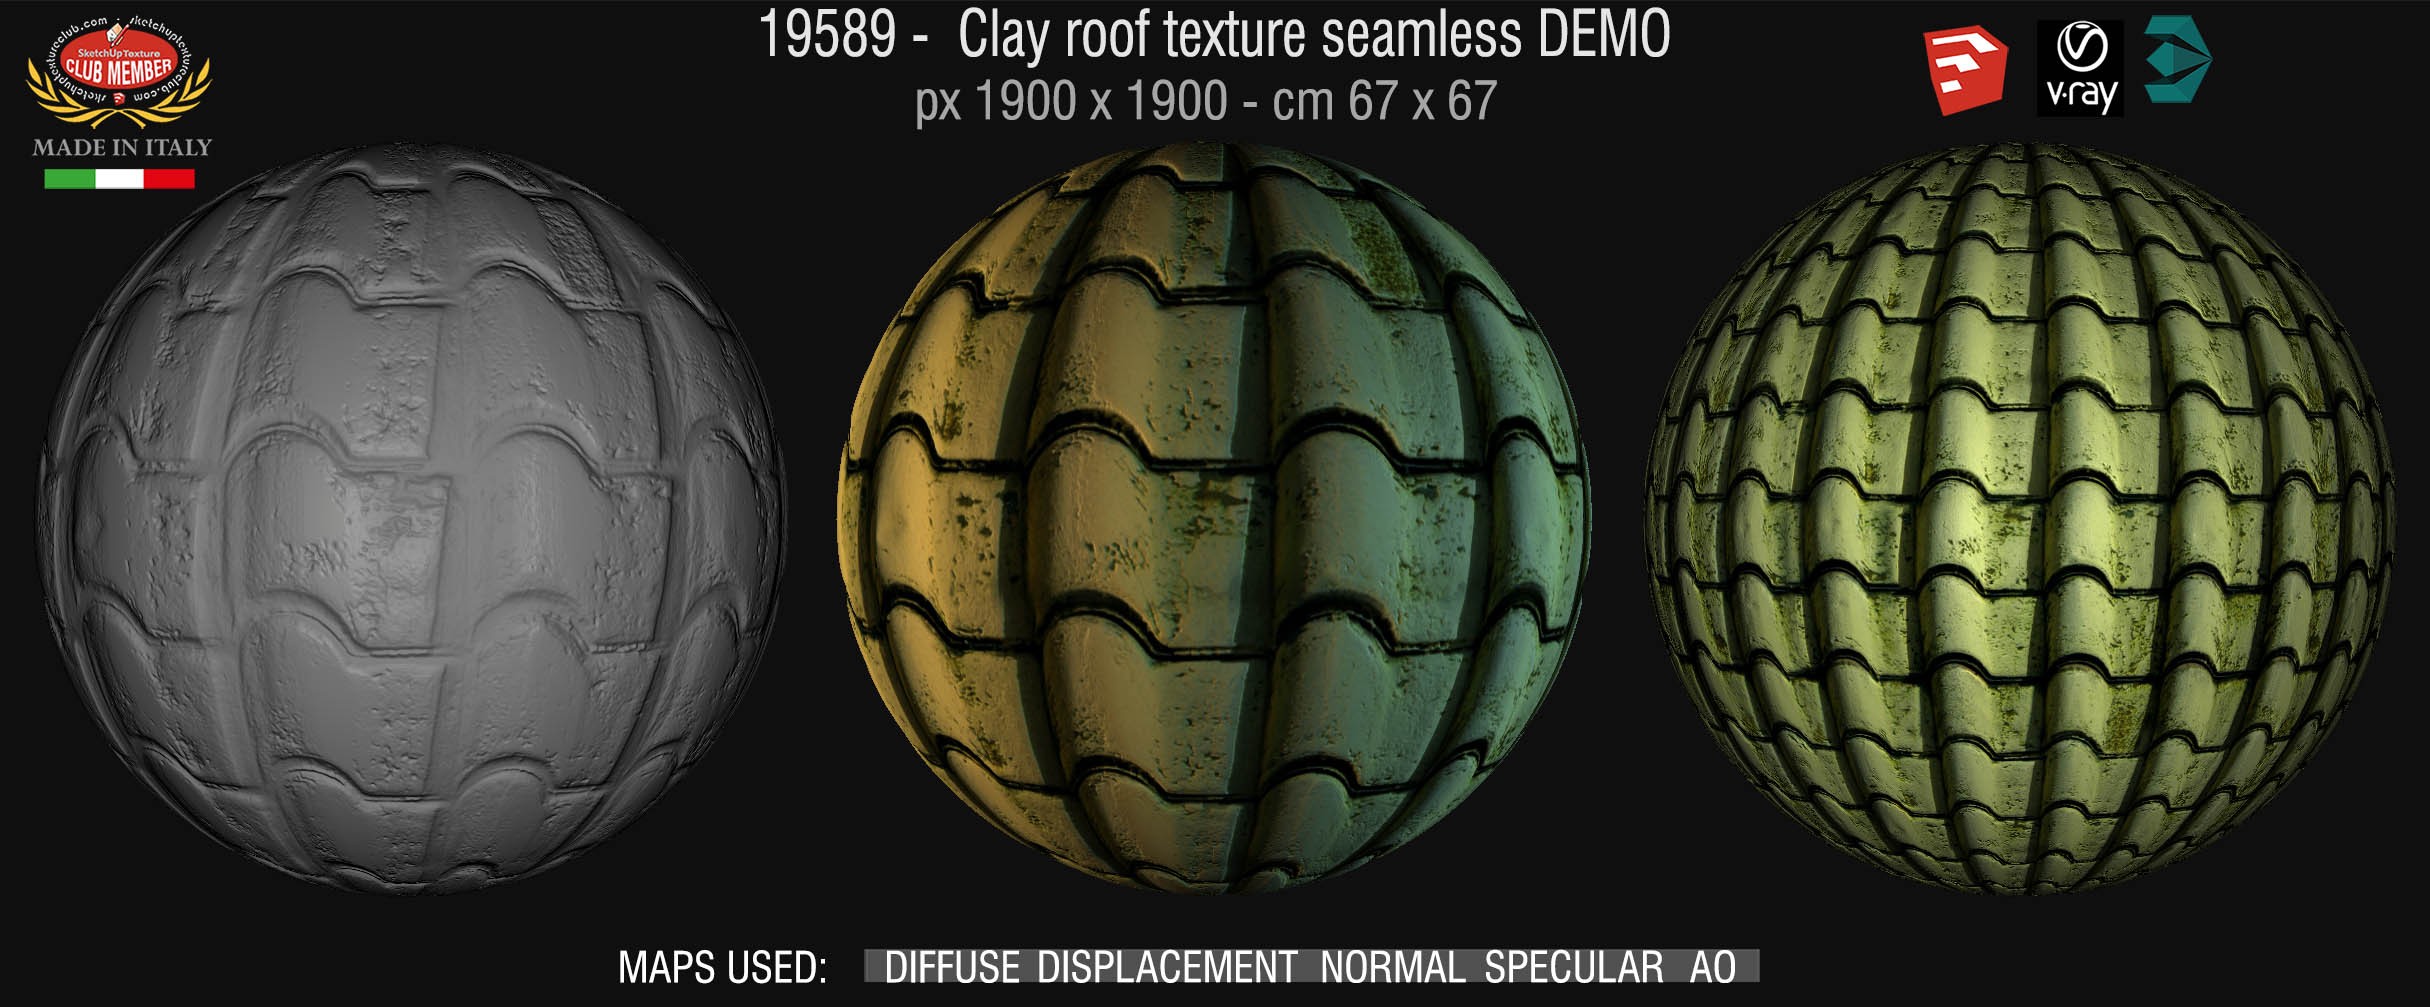 19589 Clay roof texture seamless + maps DEMO